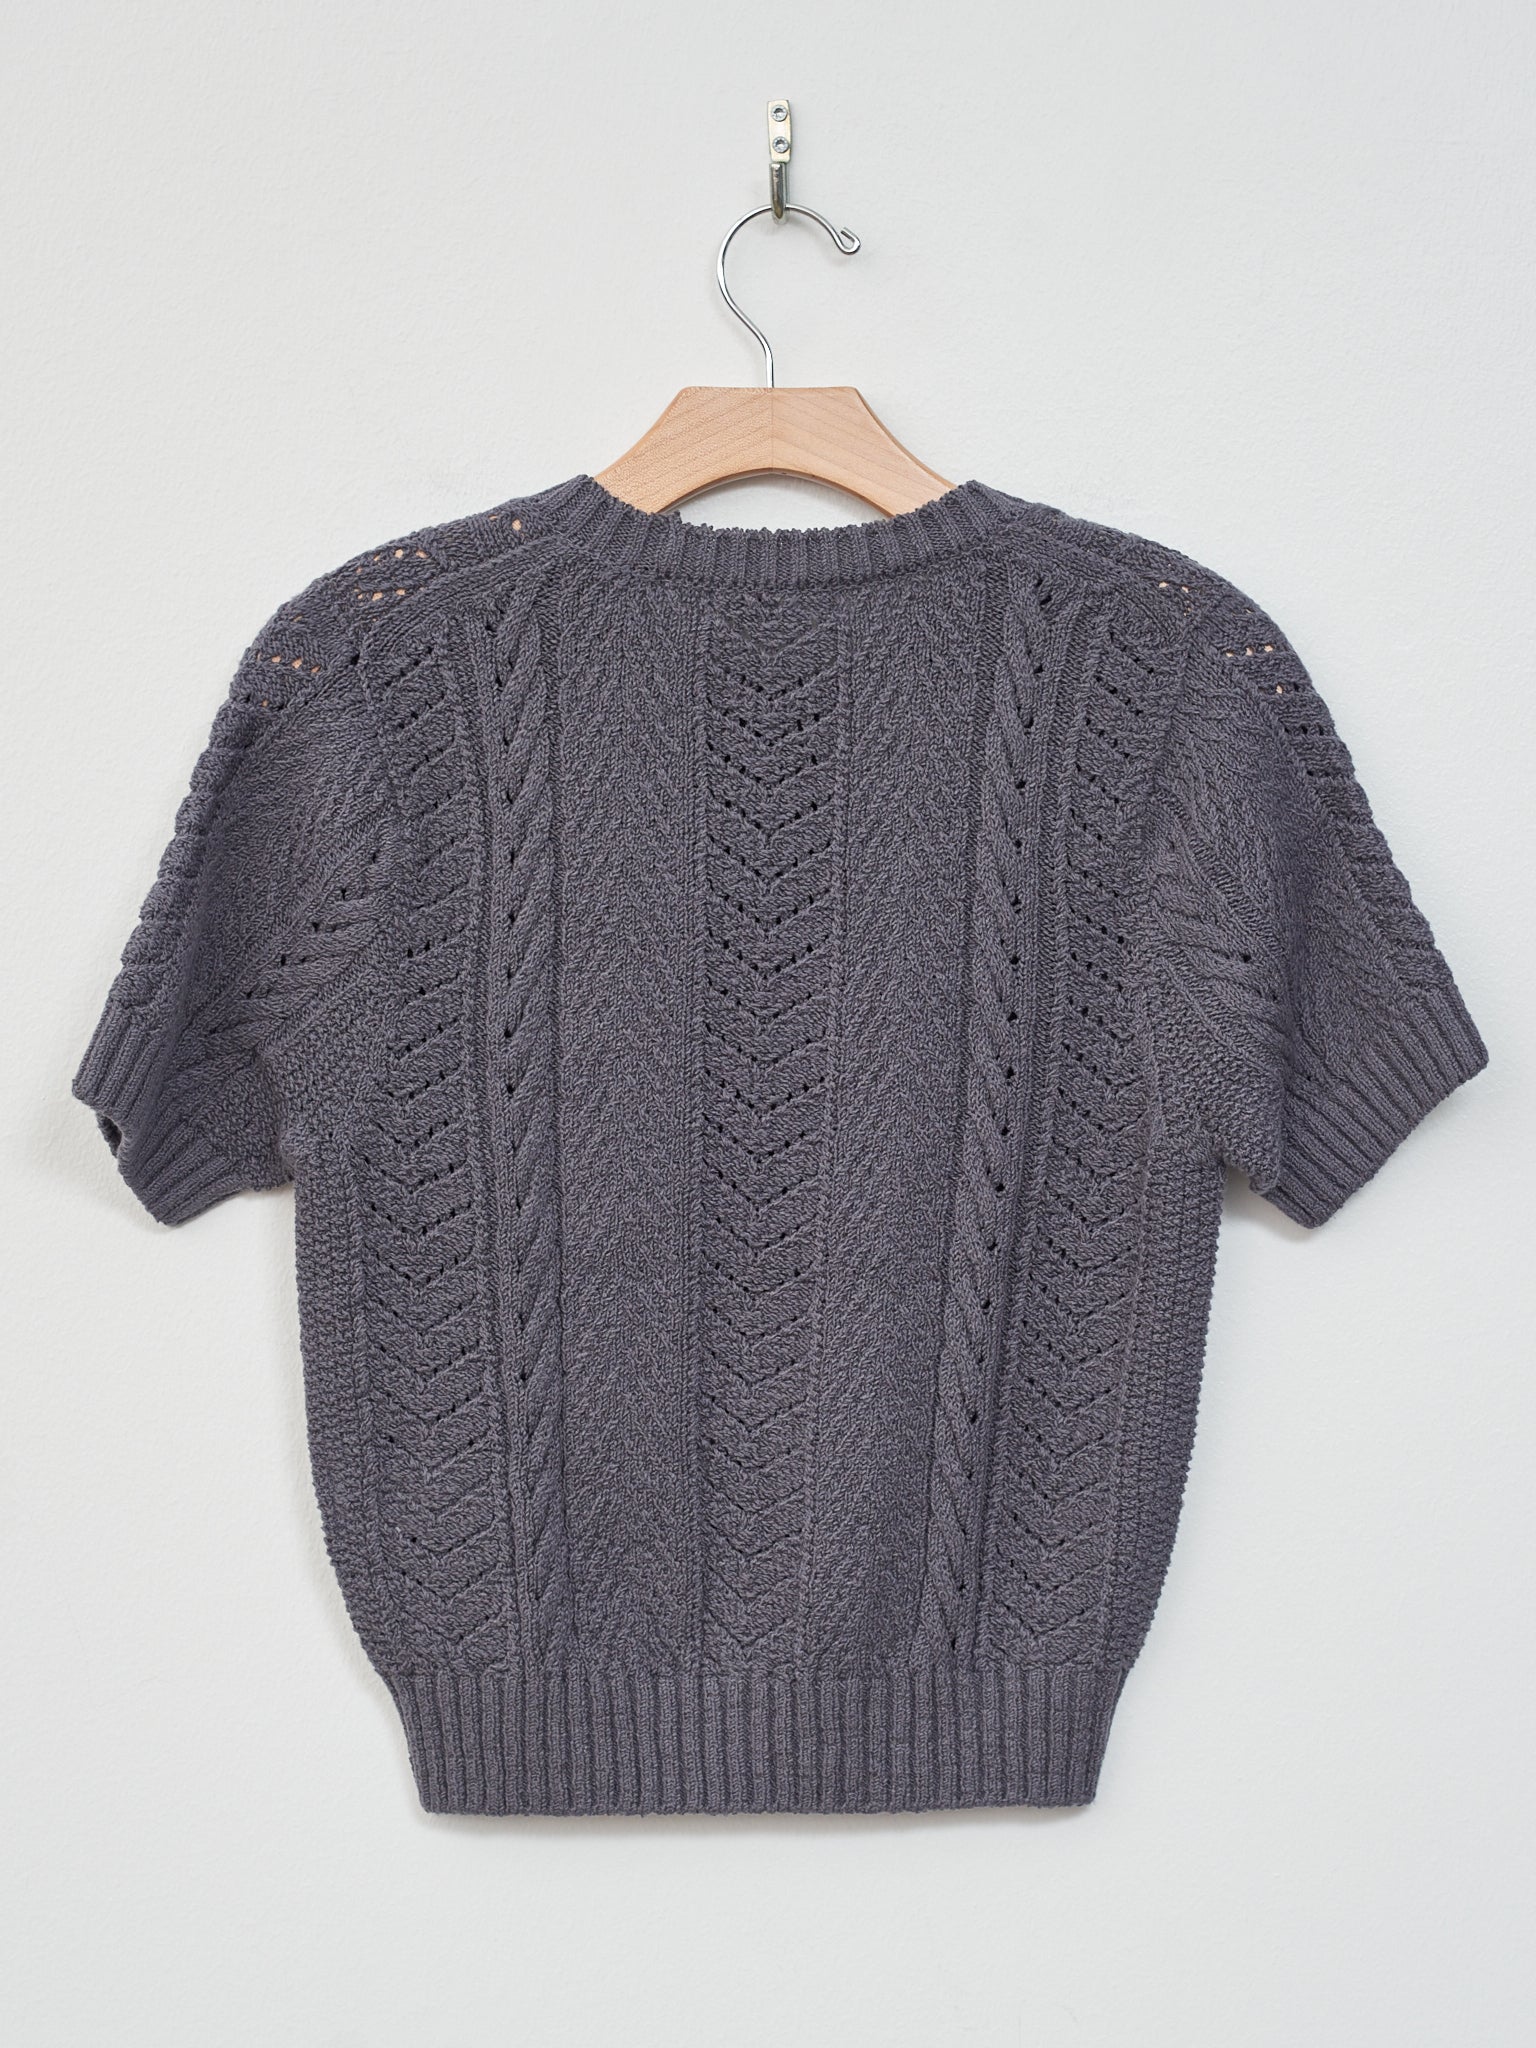 Namu Shop - Unfil Open Work Cable Knit Sweater - Charcoal